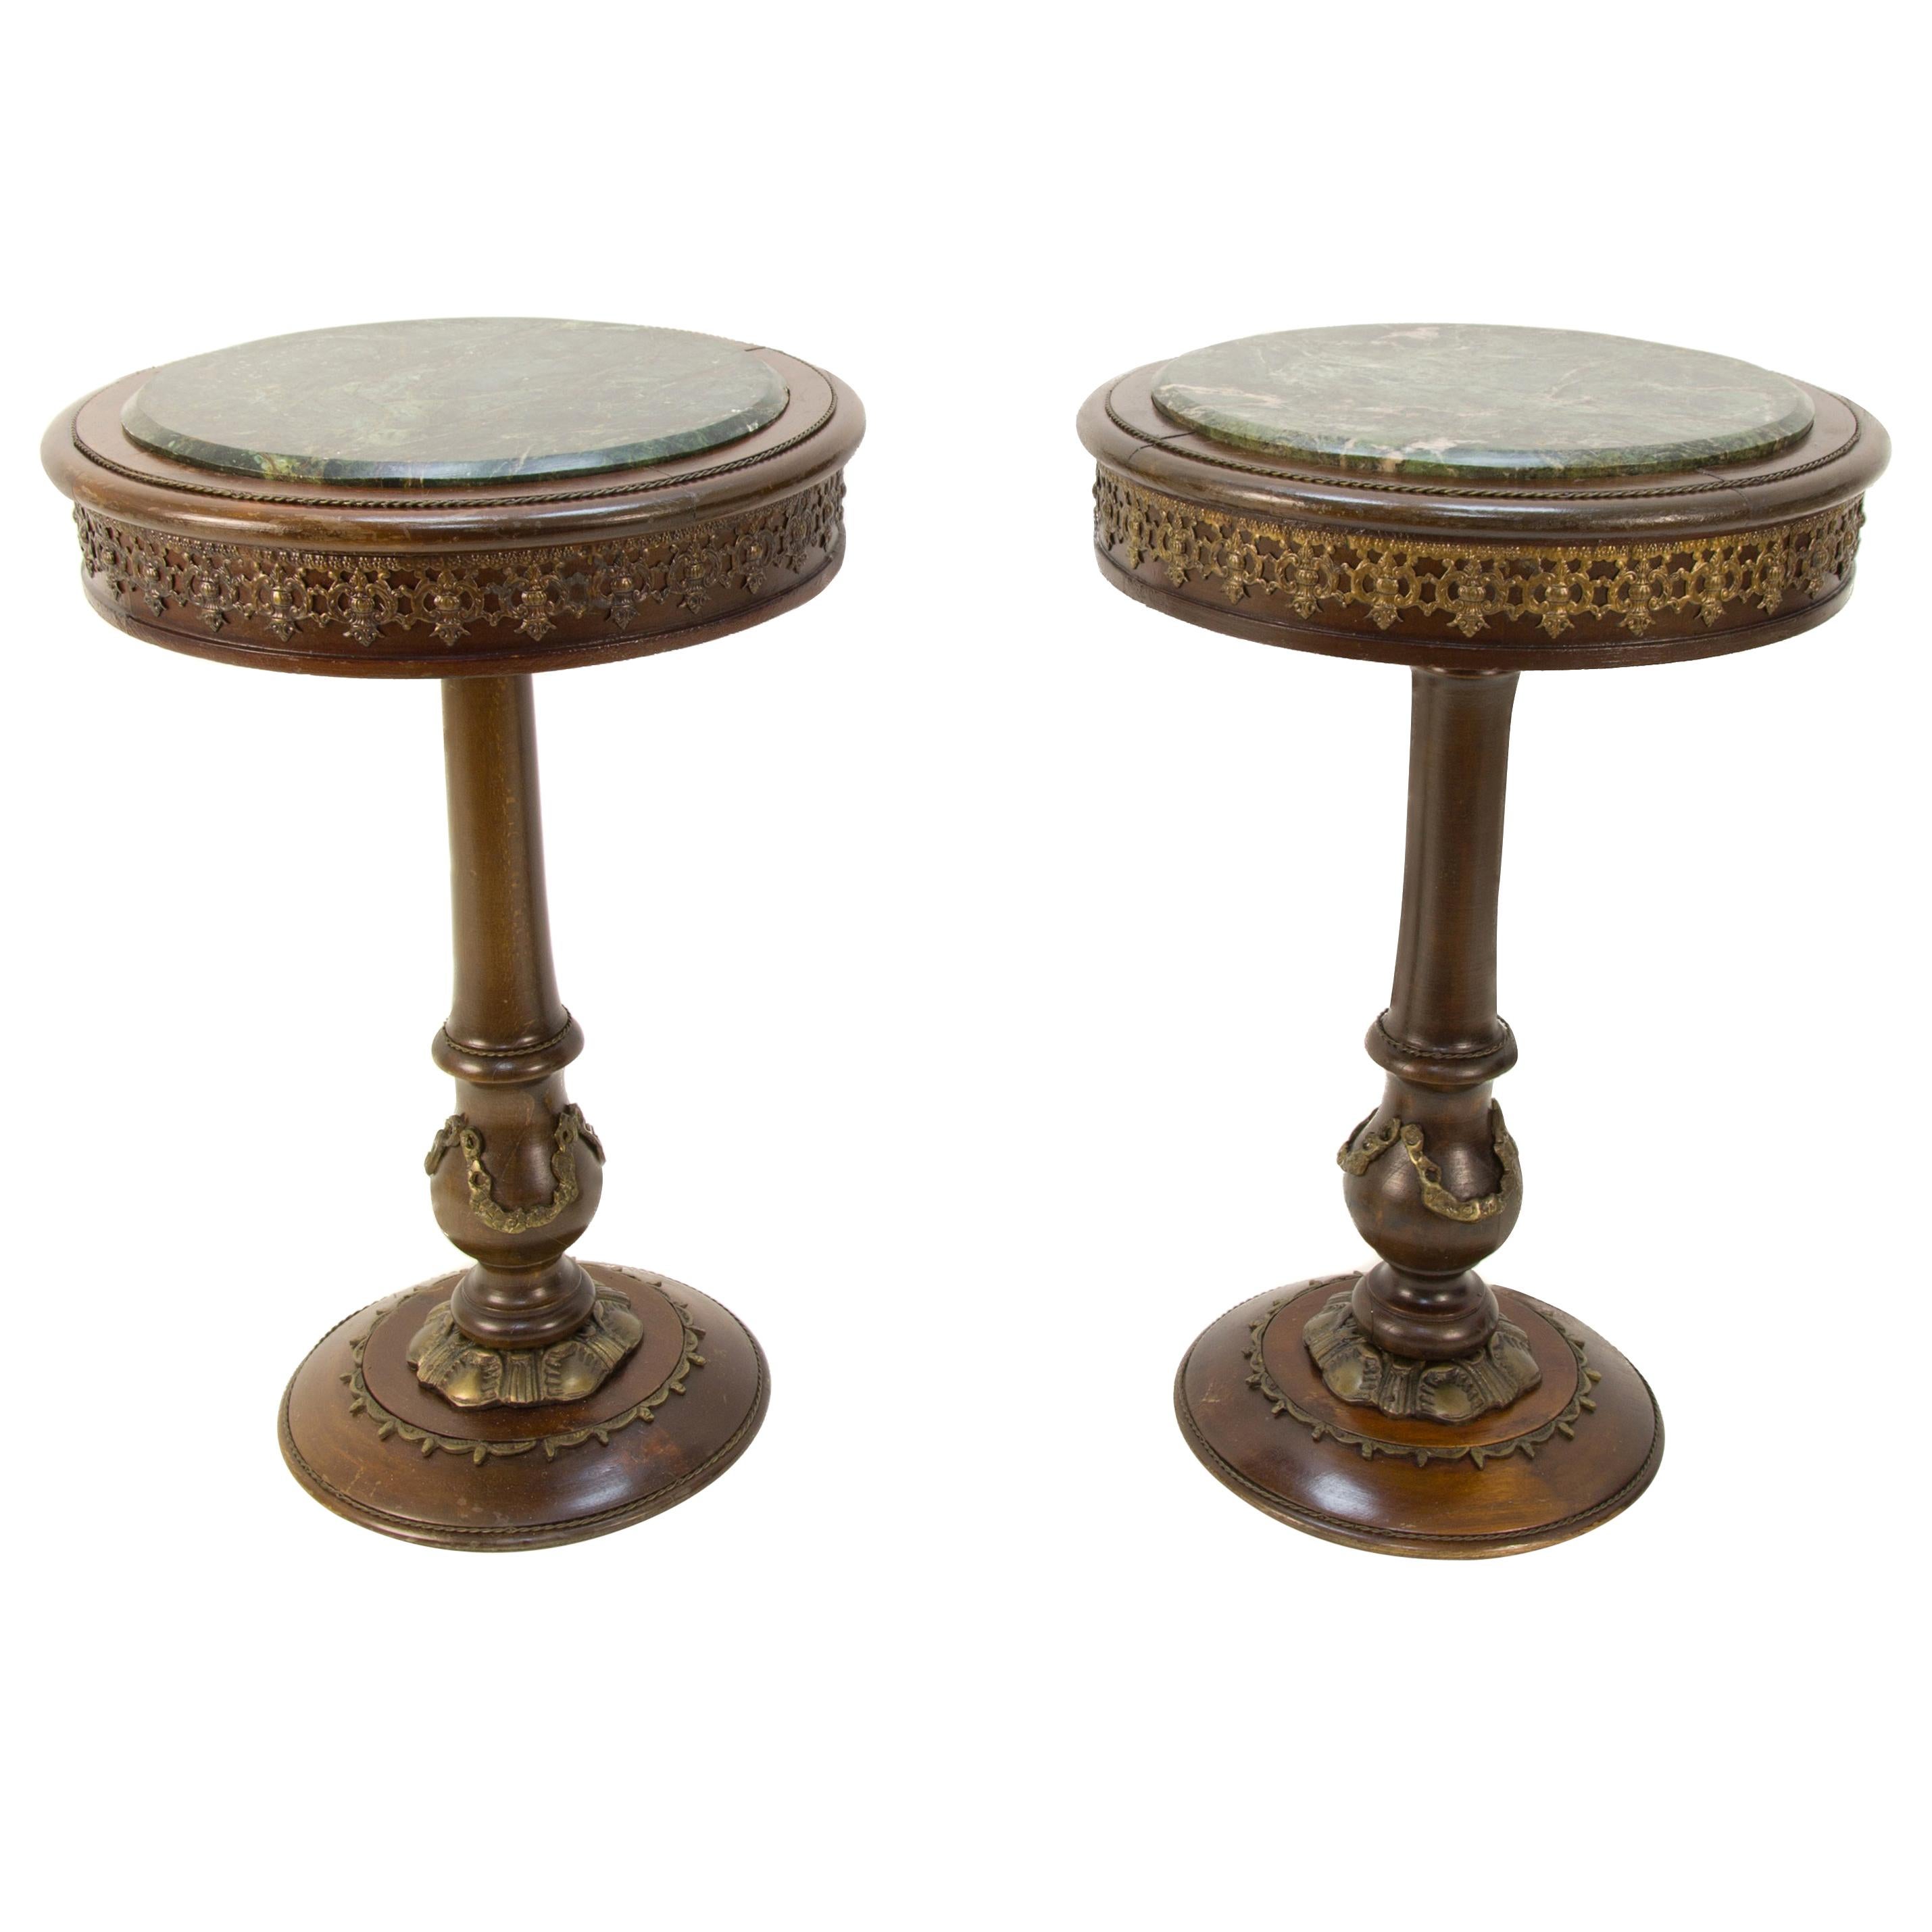 Pair of French Wooden Marble-Top Pedestals